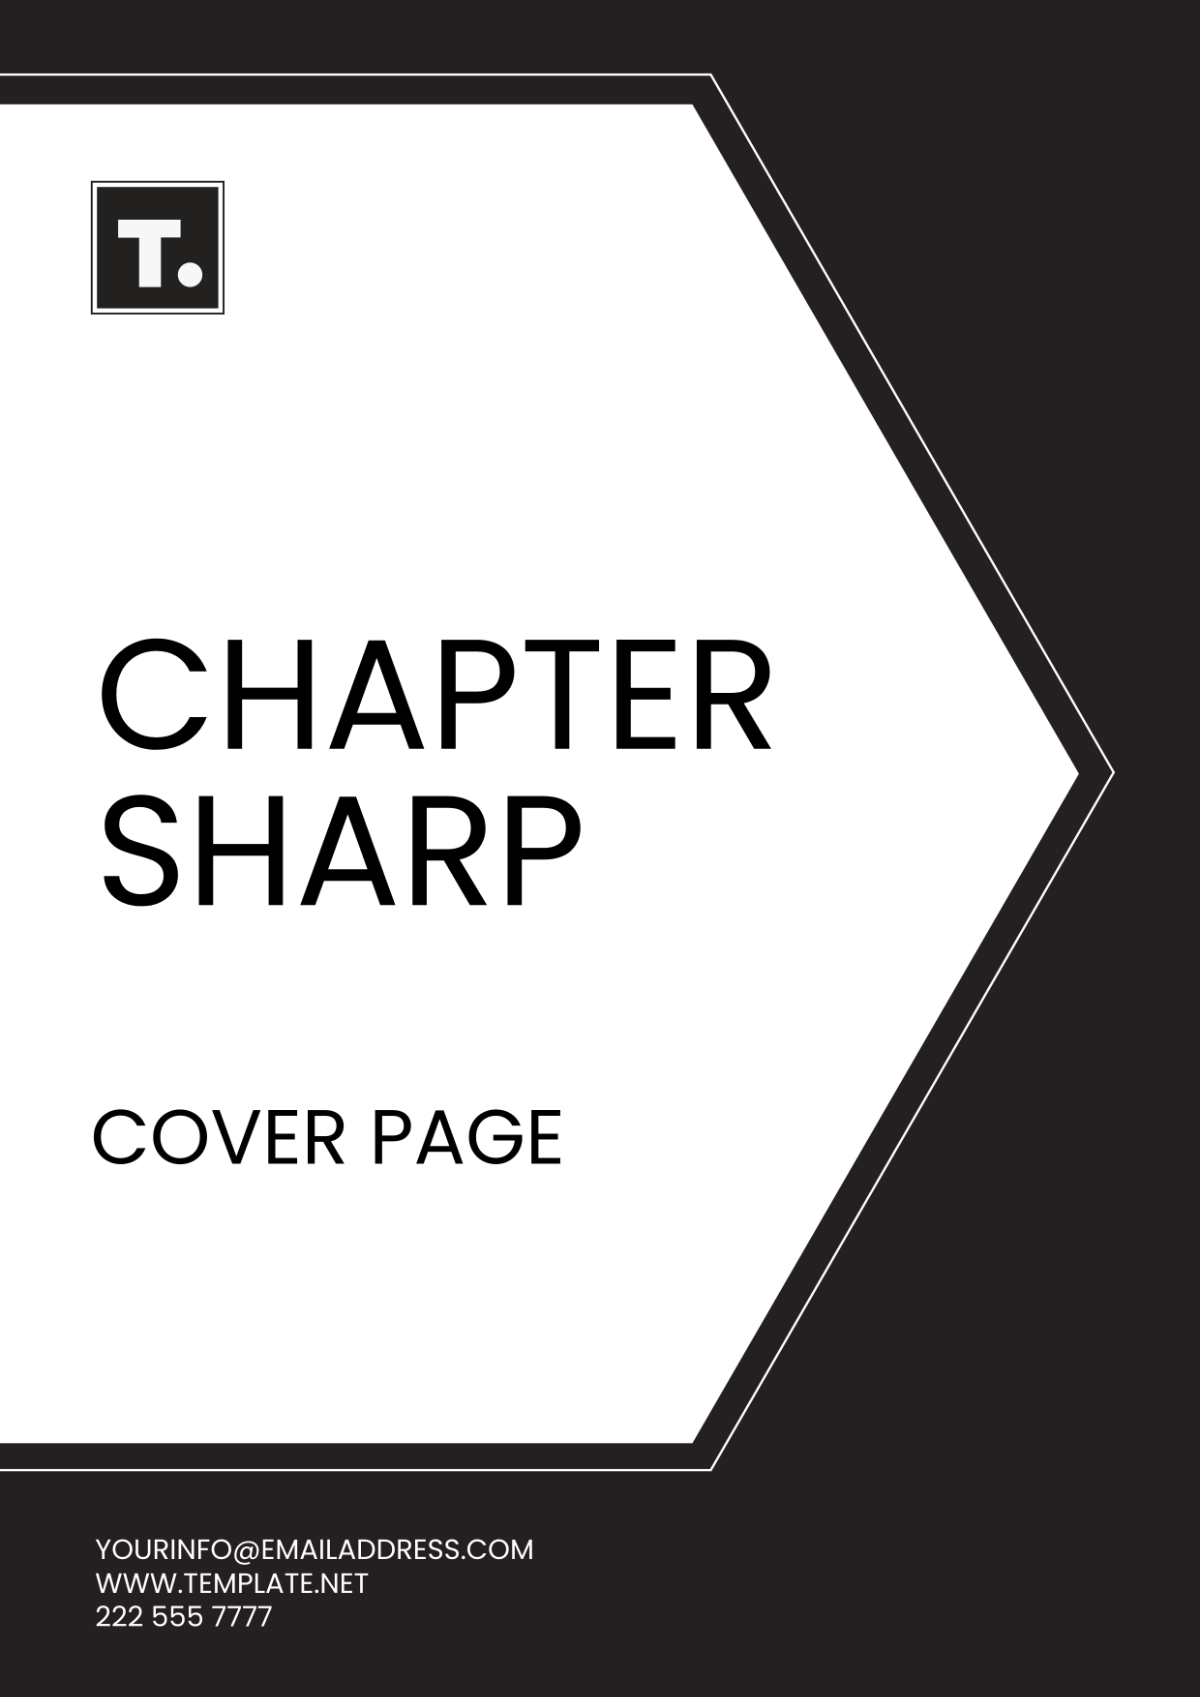 Chapter Sharp Cover Page Template